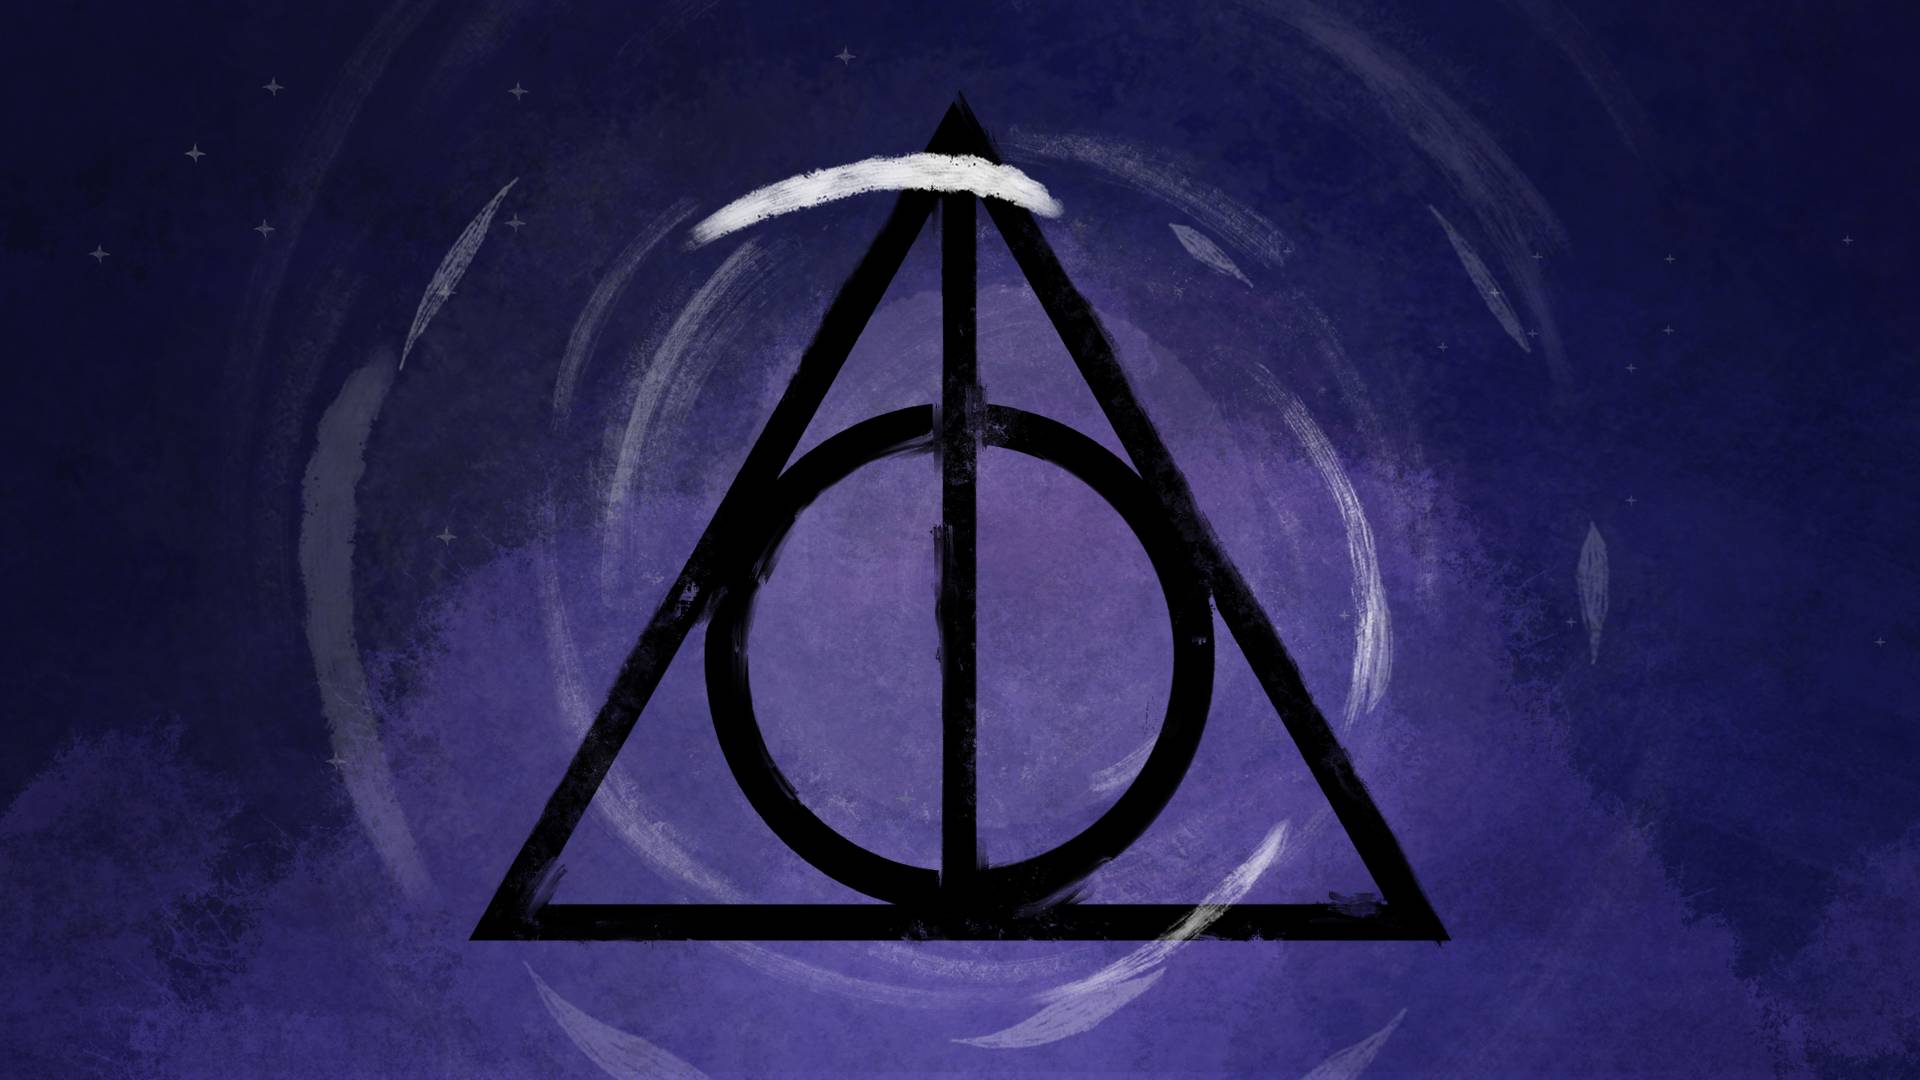 pmp-hogwarts-library-deathly-hallows